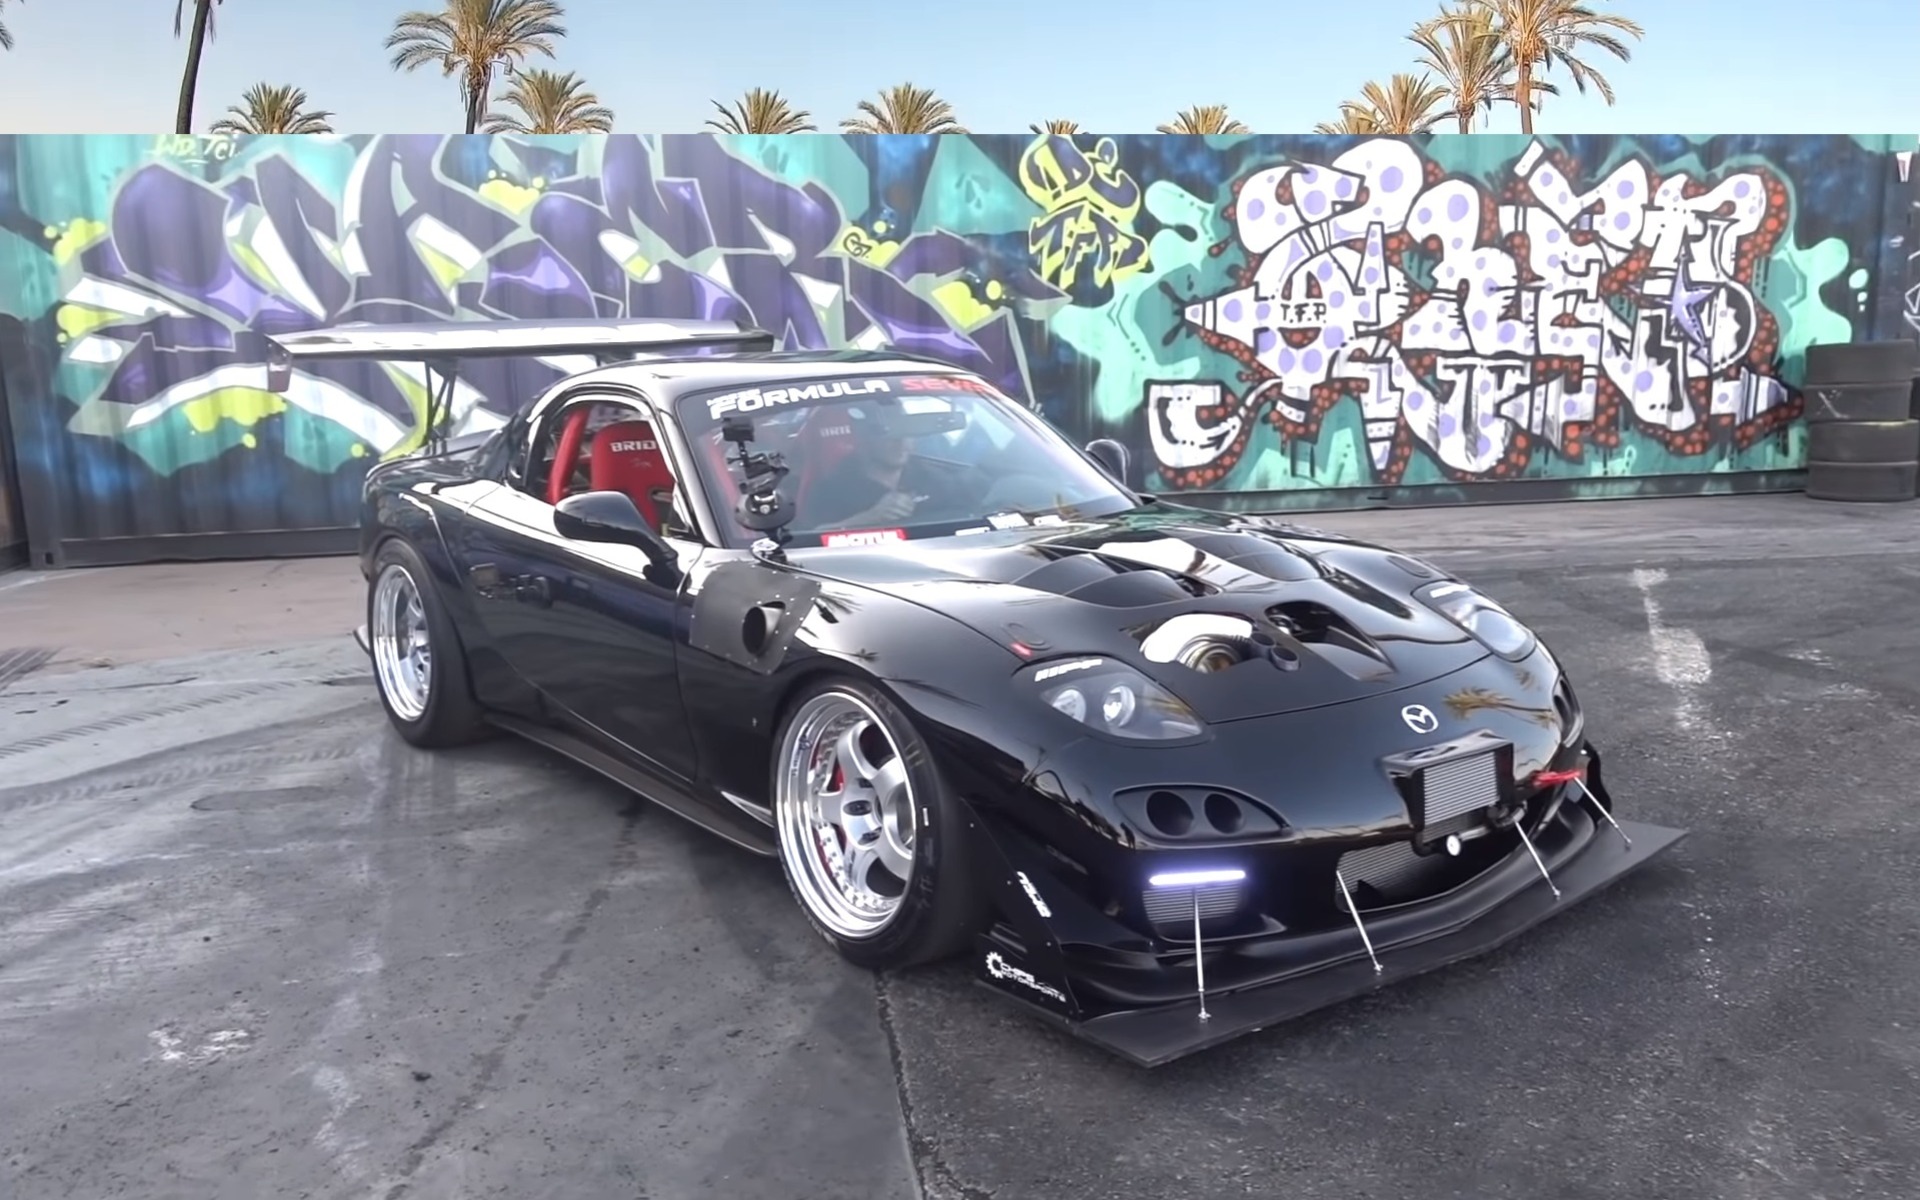 Here's a Mazda RX-7 with Four Rotors, 1,000 Hp and Mad Sound